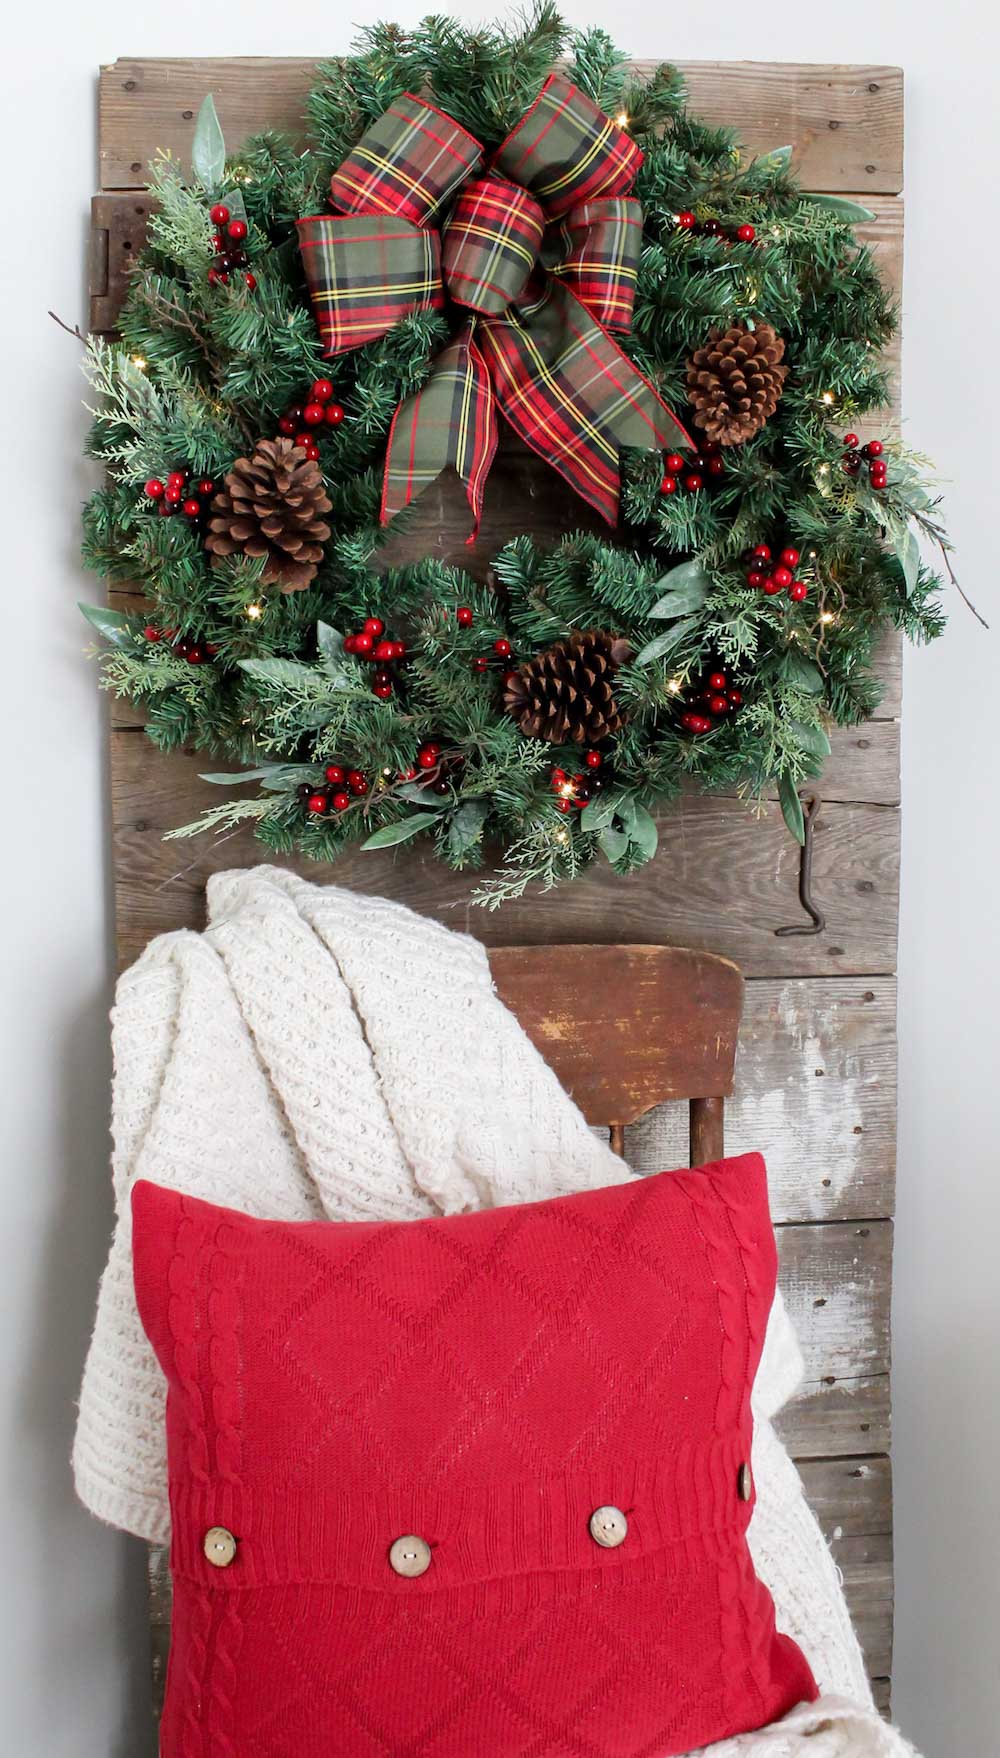 Holiday wreath hanging on wooden wall panel with a chair in front covered with a blanket and red pillow